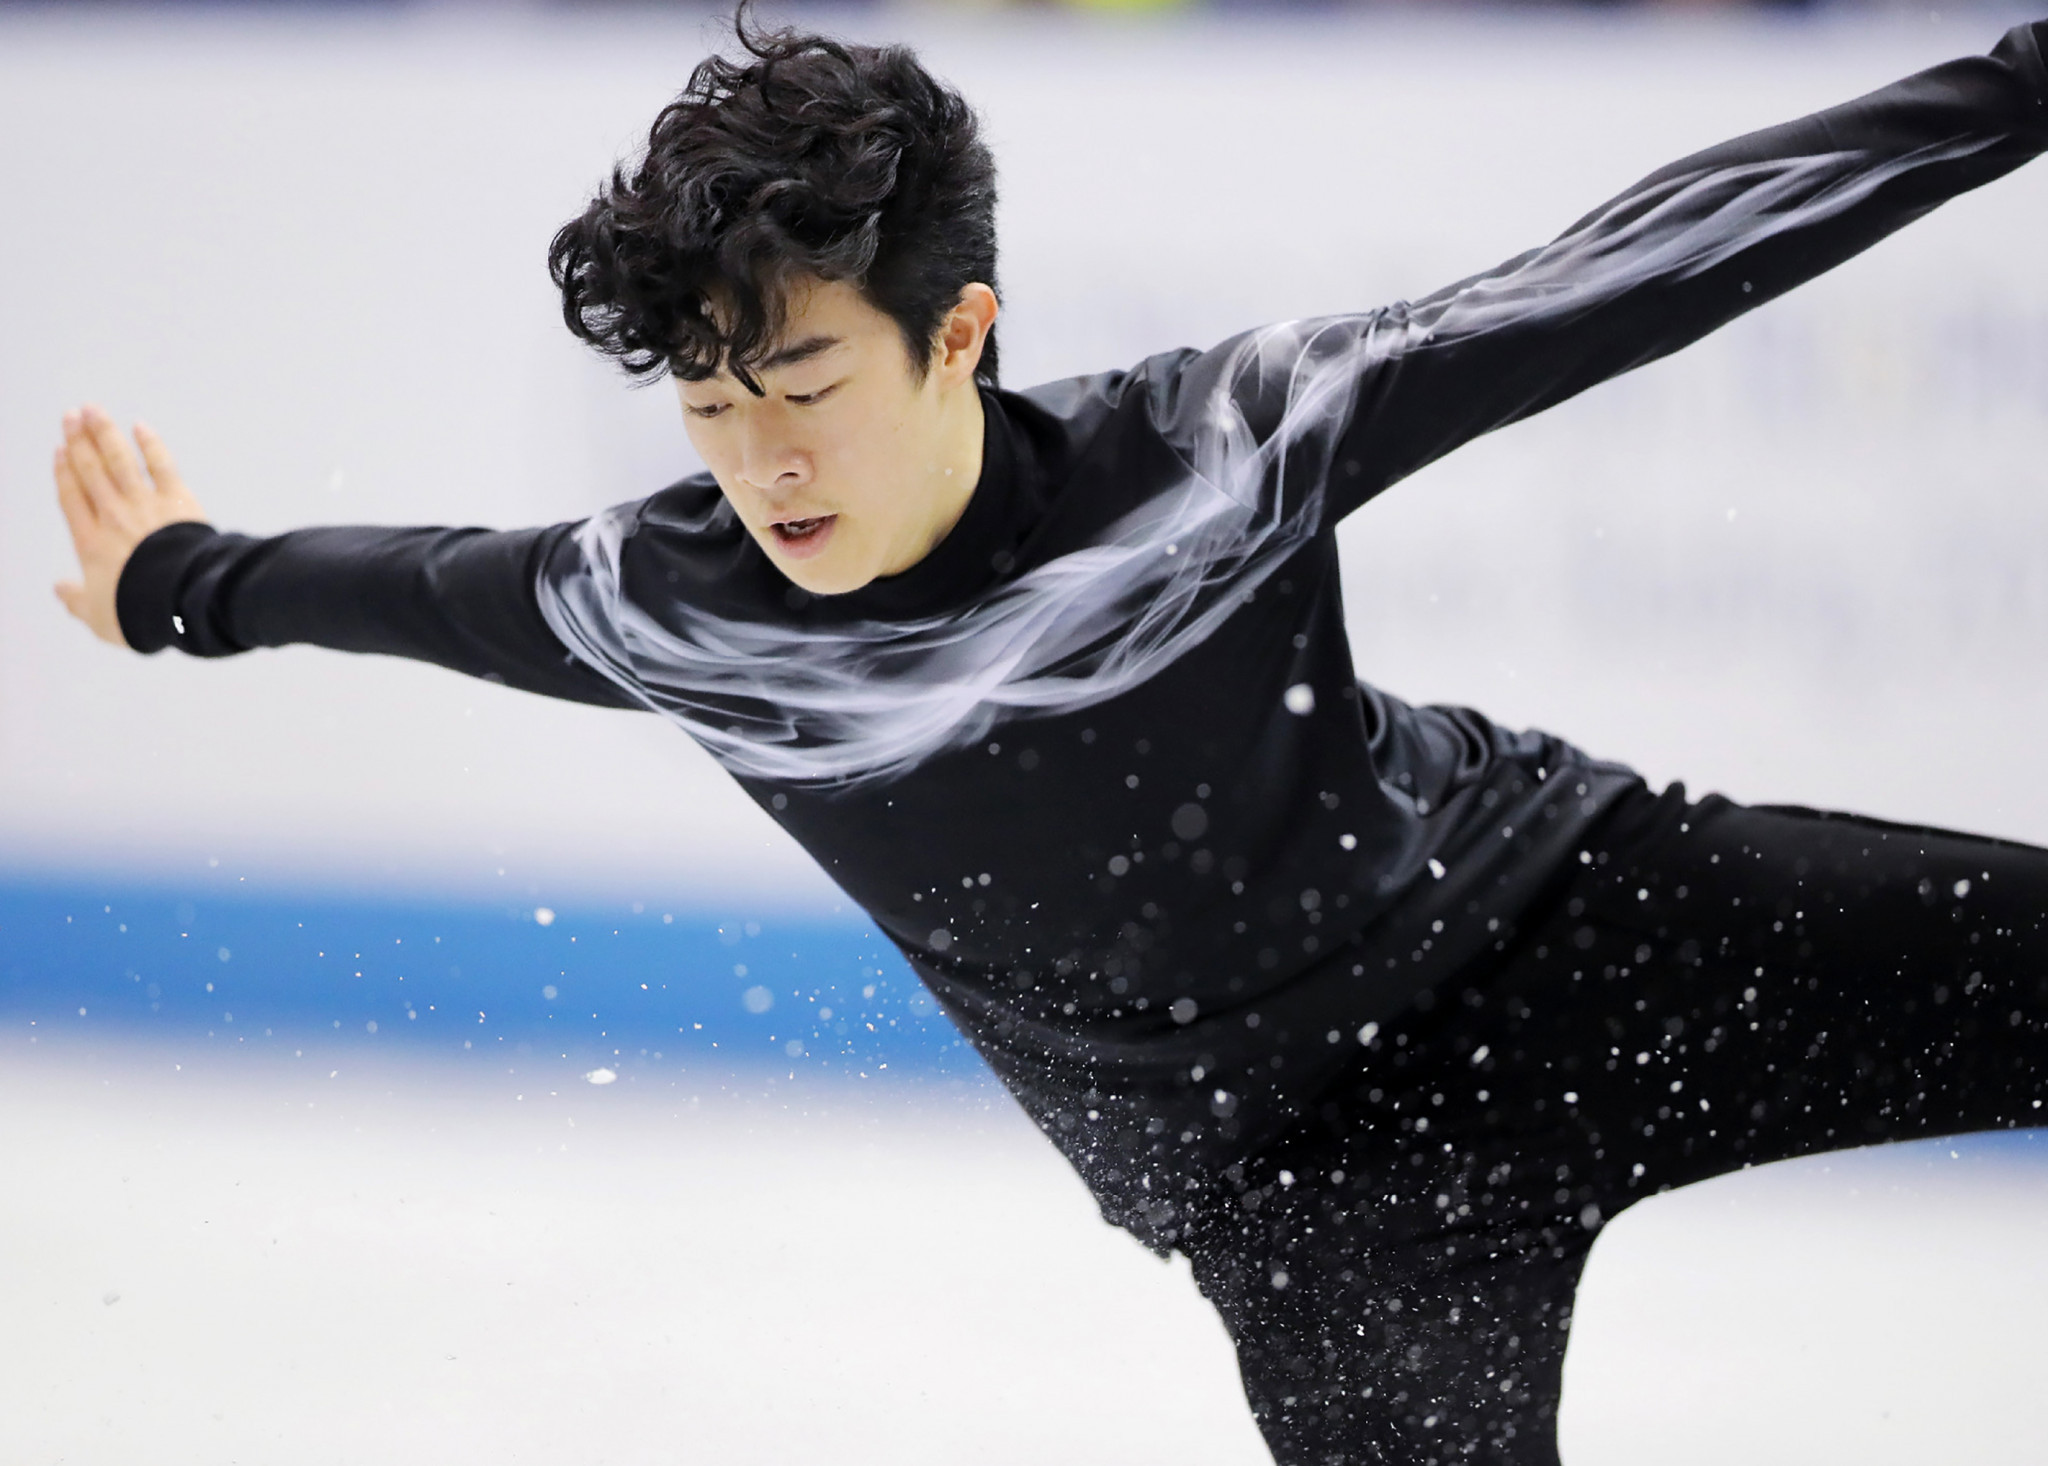 At Skate America, 2019 world champion Nathan Chen will be the star attraction at his home event ©Getty Images